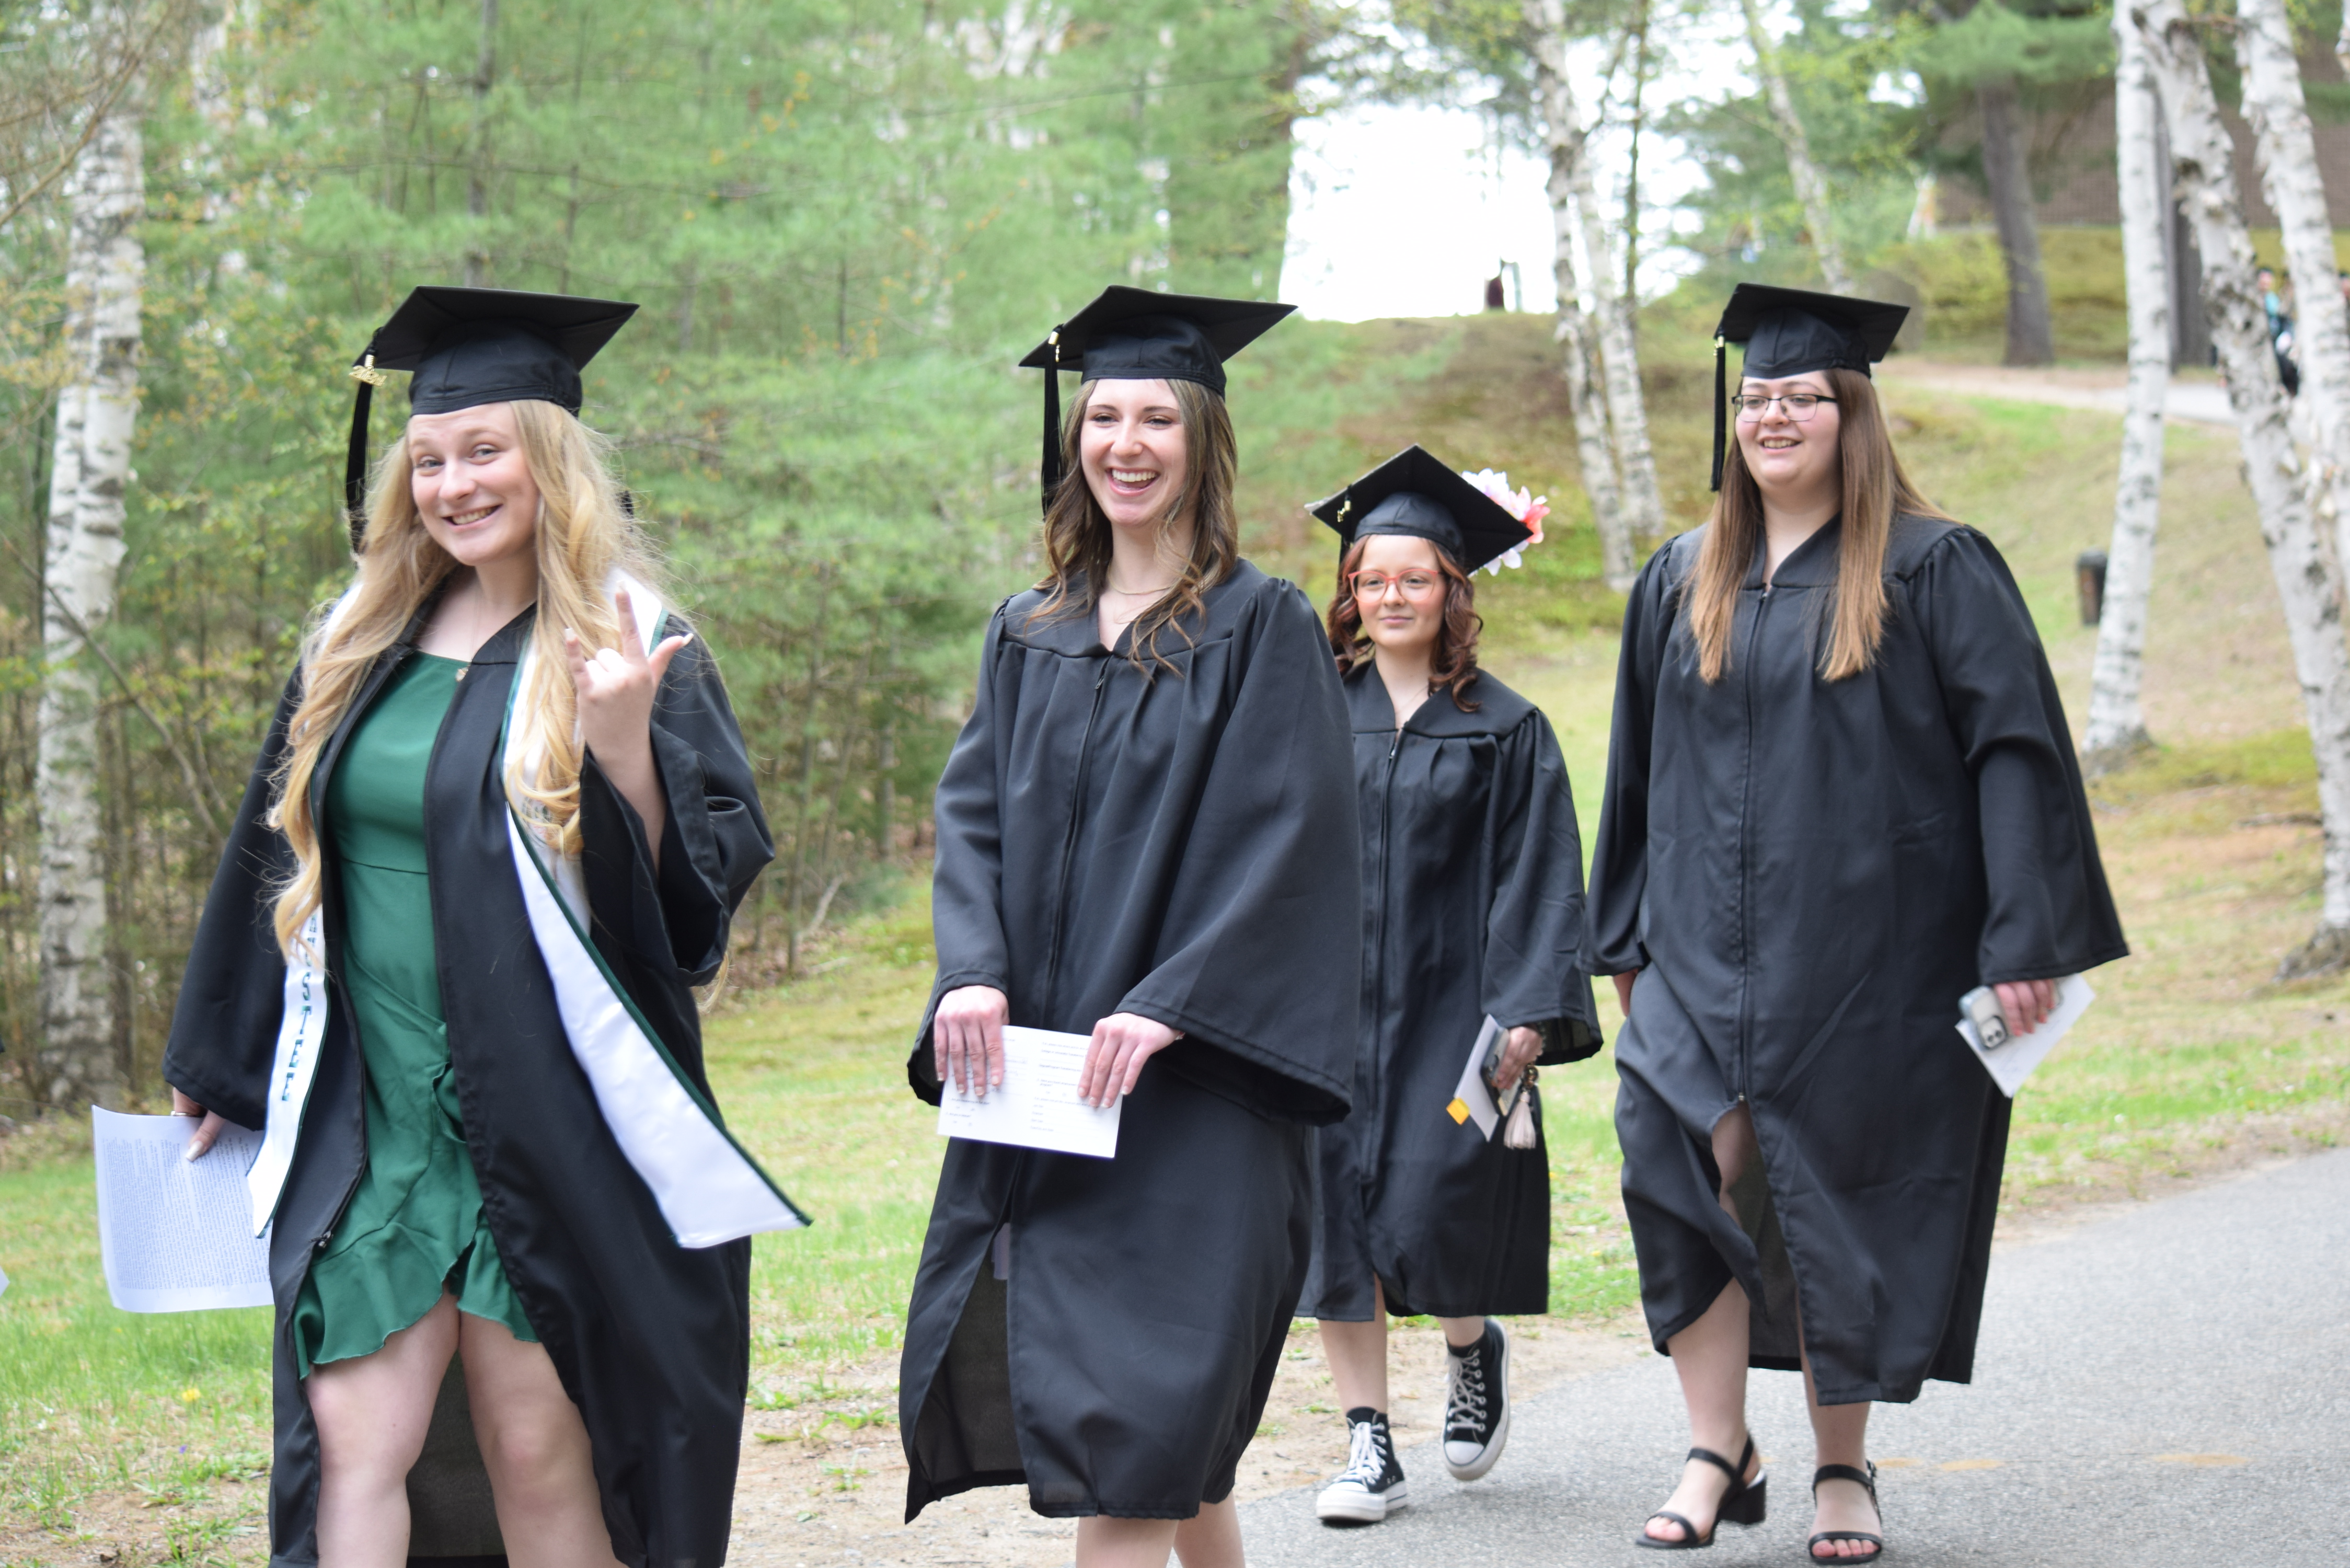 Students are all smiles as they get ready to graduate